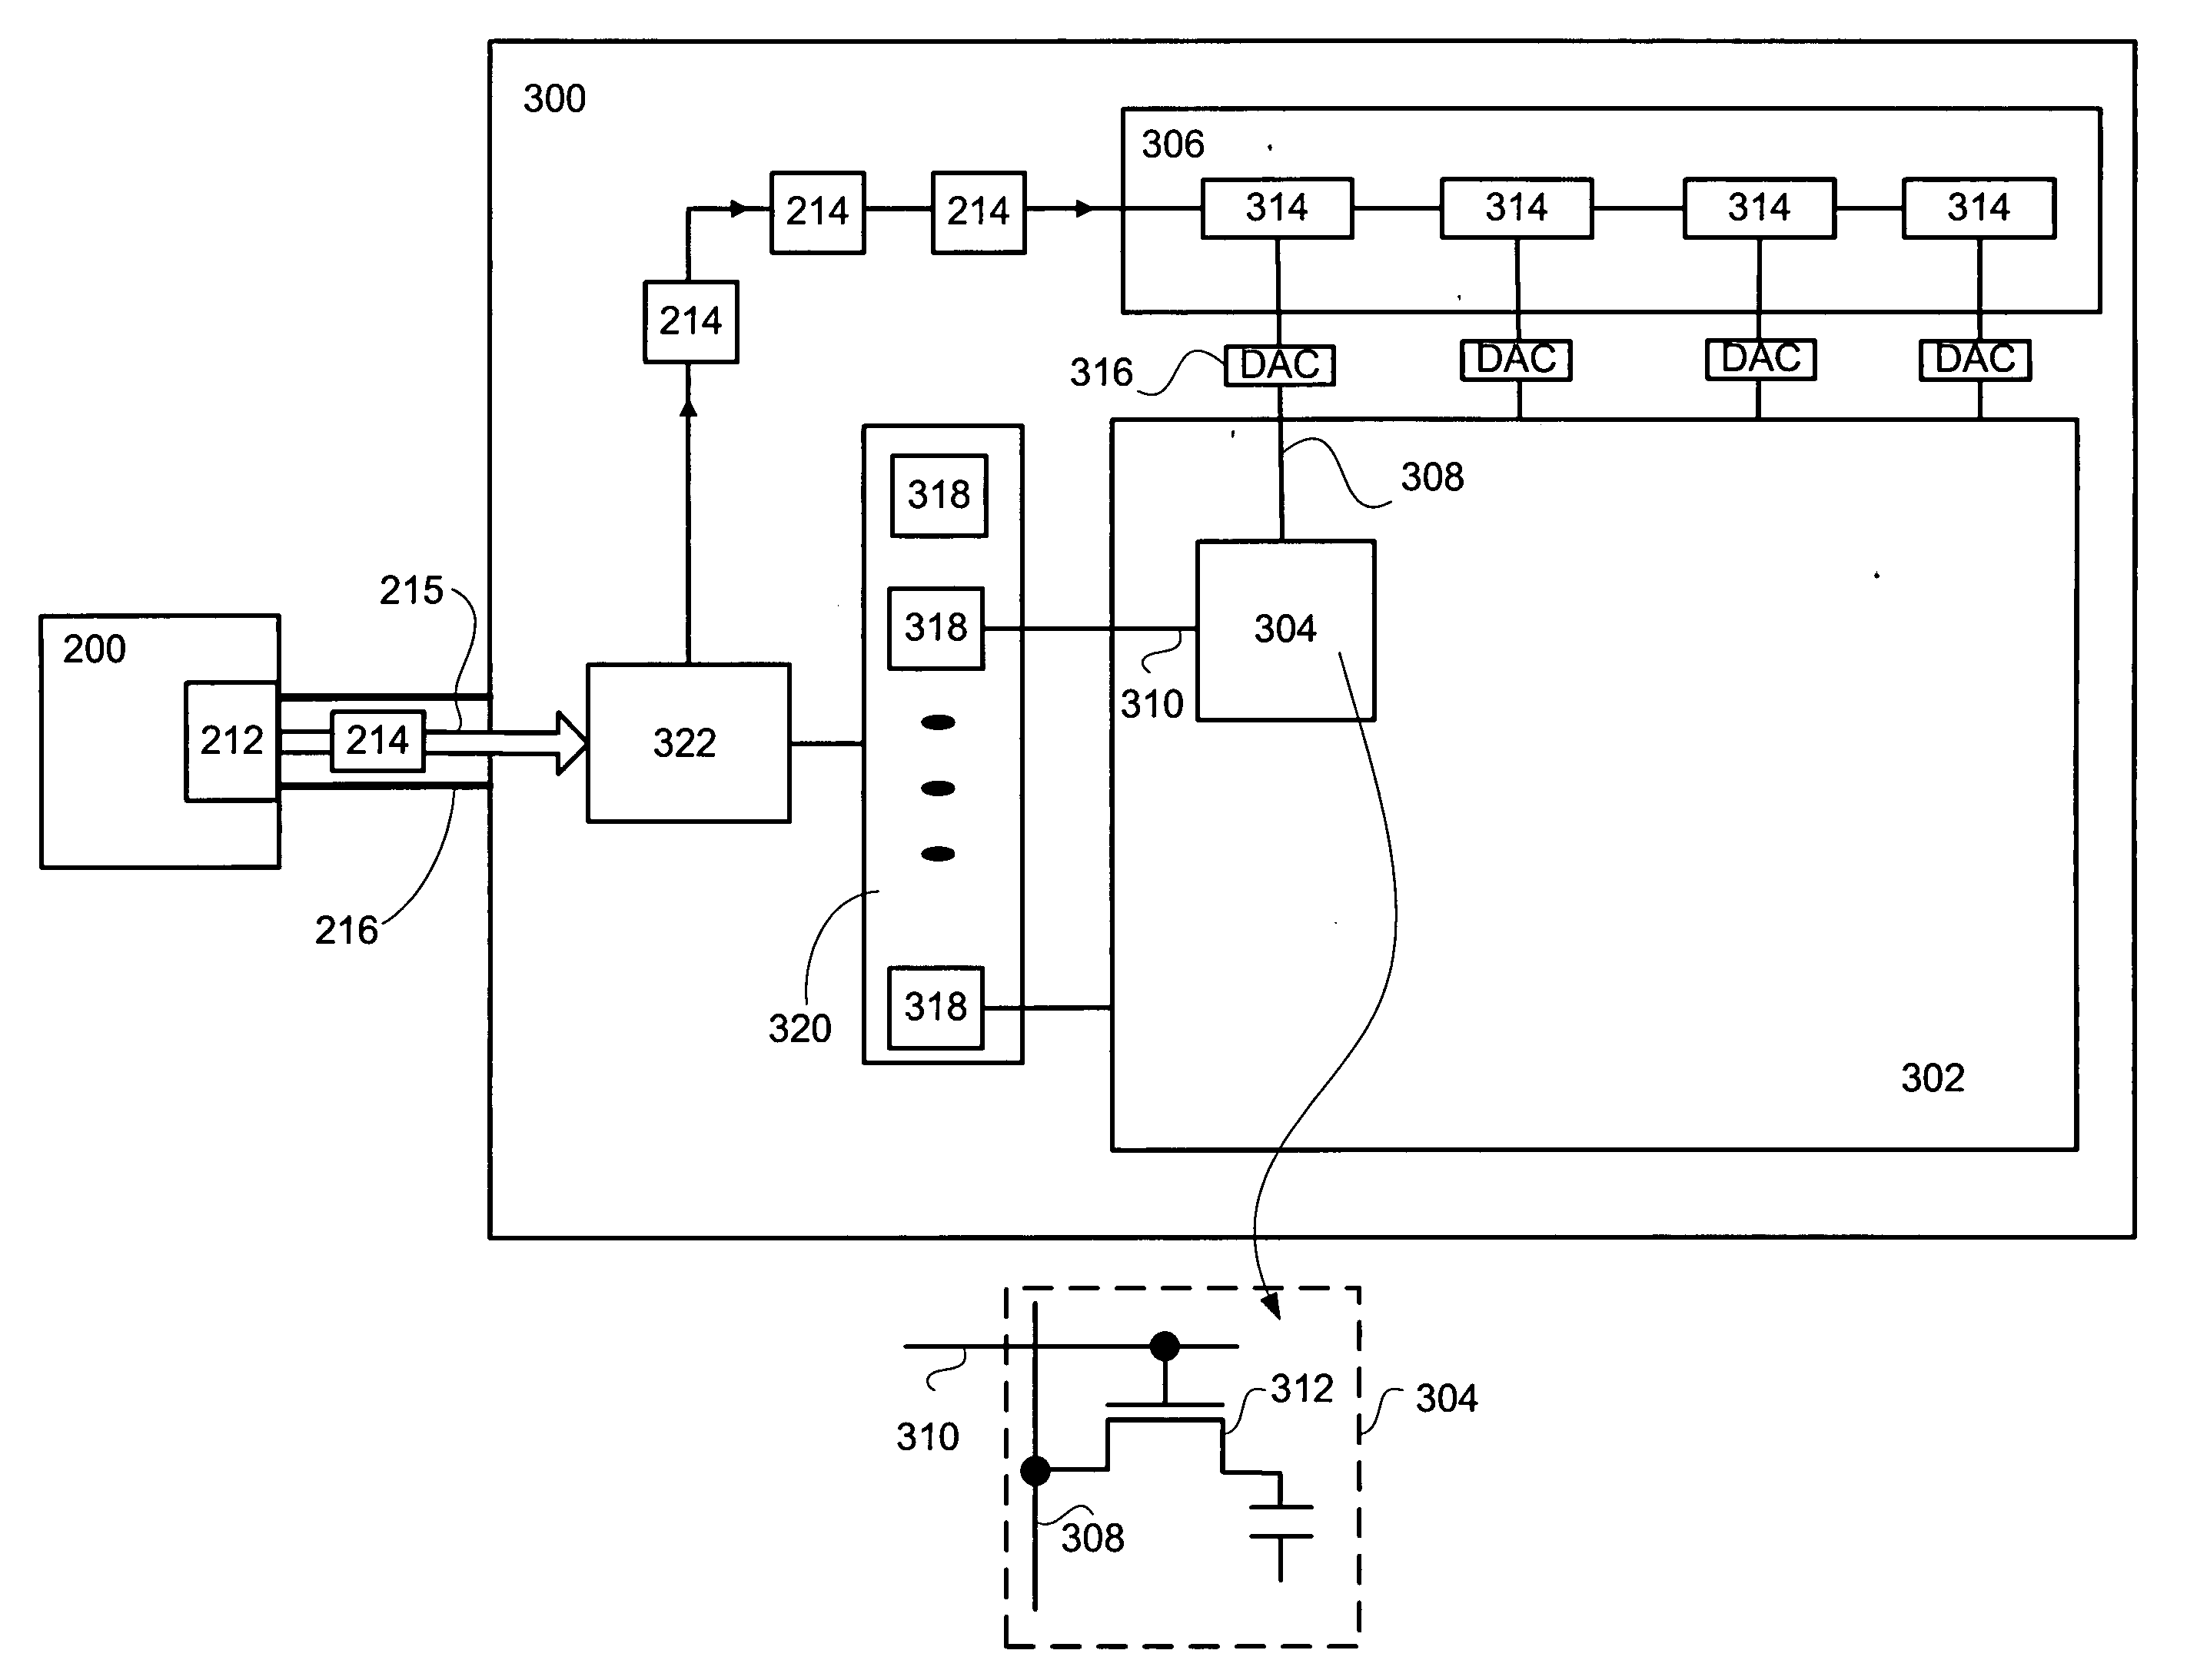 Bypassing pixel clock generation and CRTC circuits in a graphics controller chip